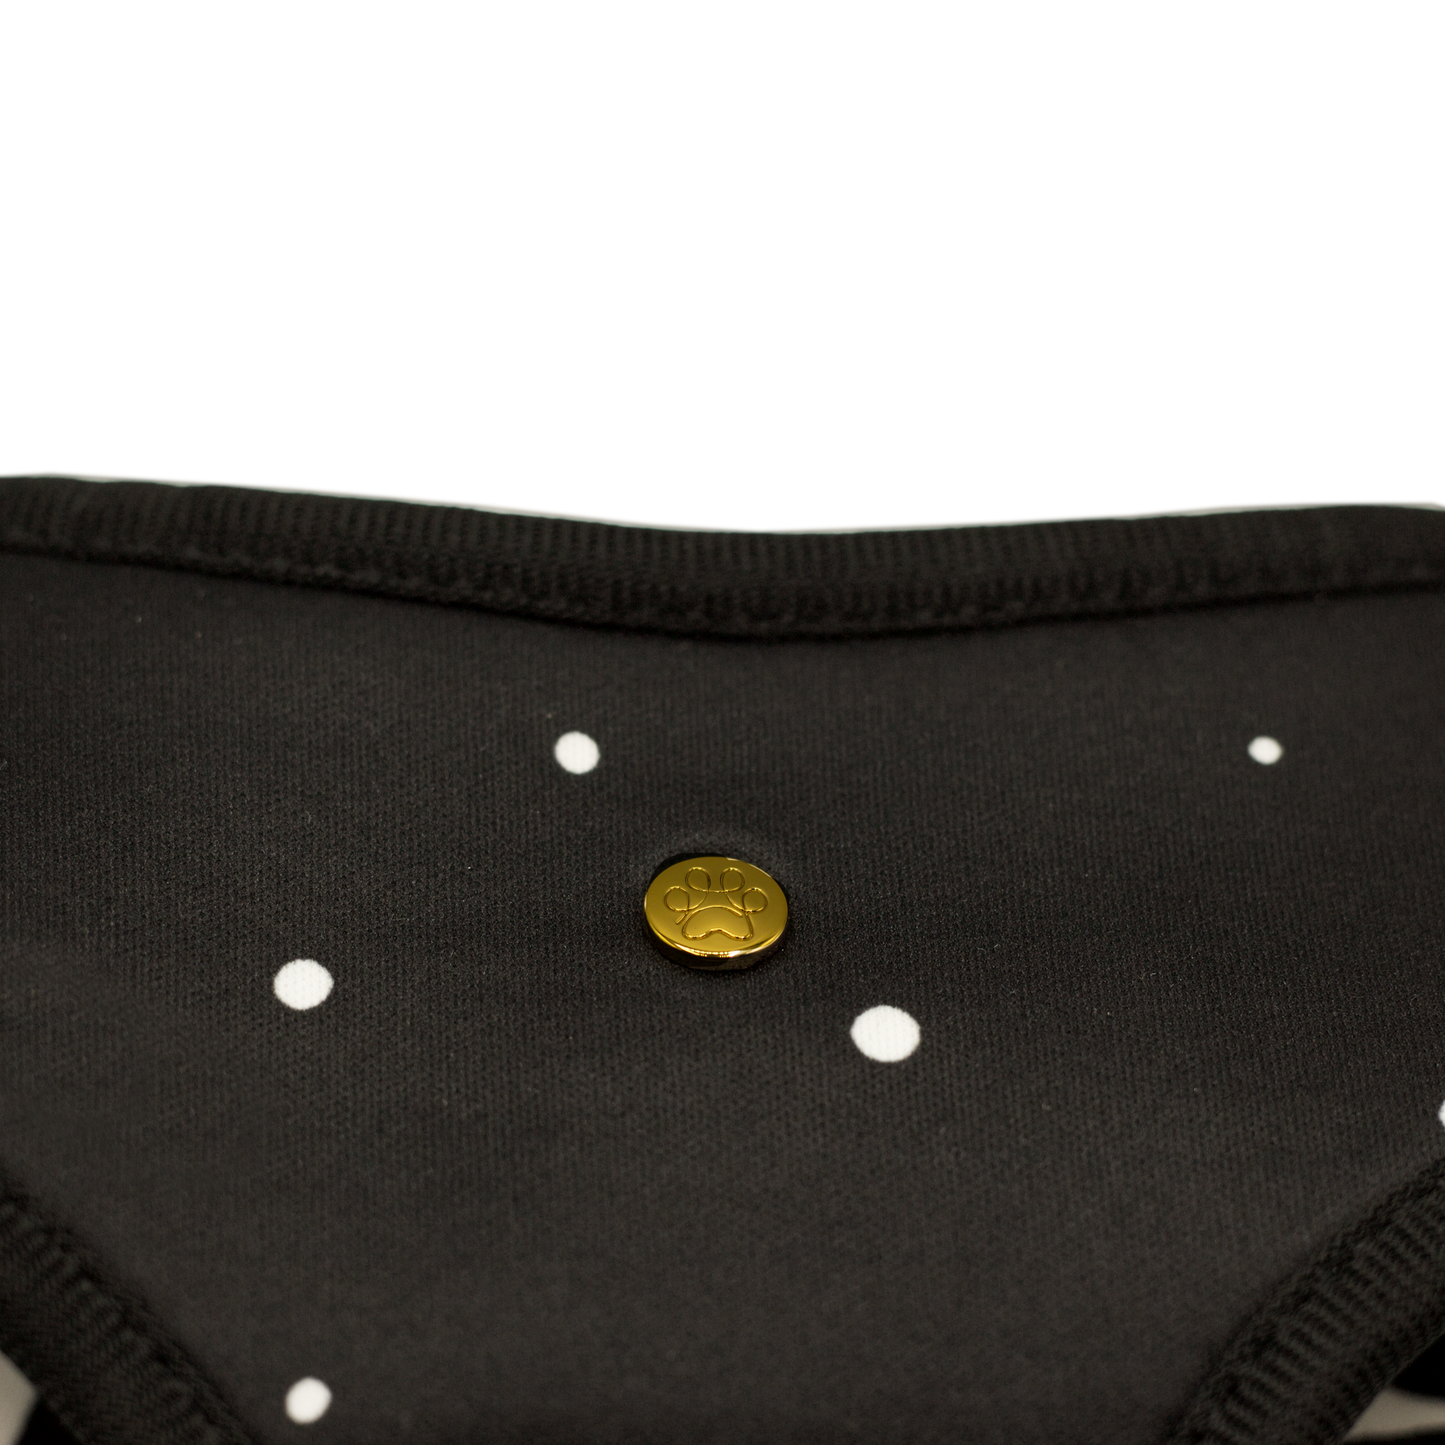 Pata Paw moo reversible harness showing a close-up of its golden paw and a timeless and chic design of hand-painted dots on a black background.